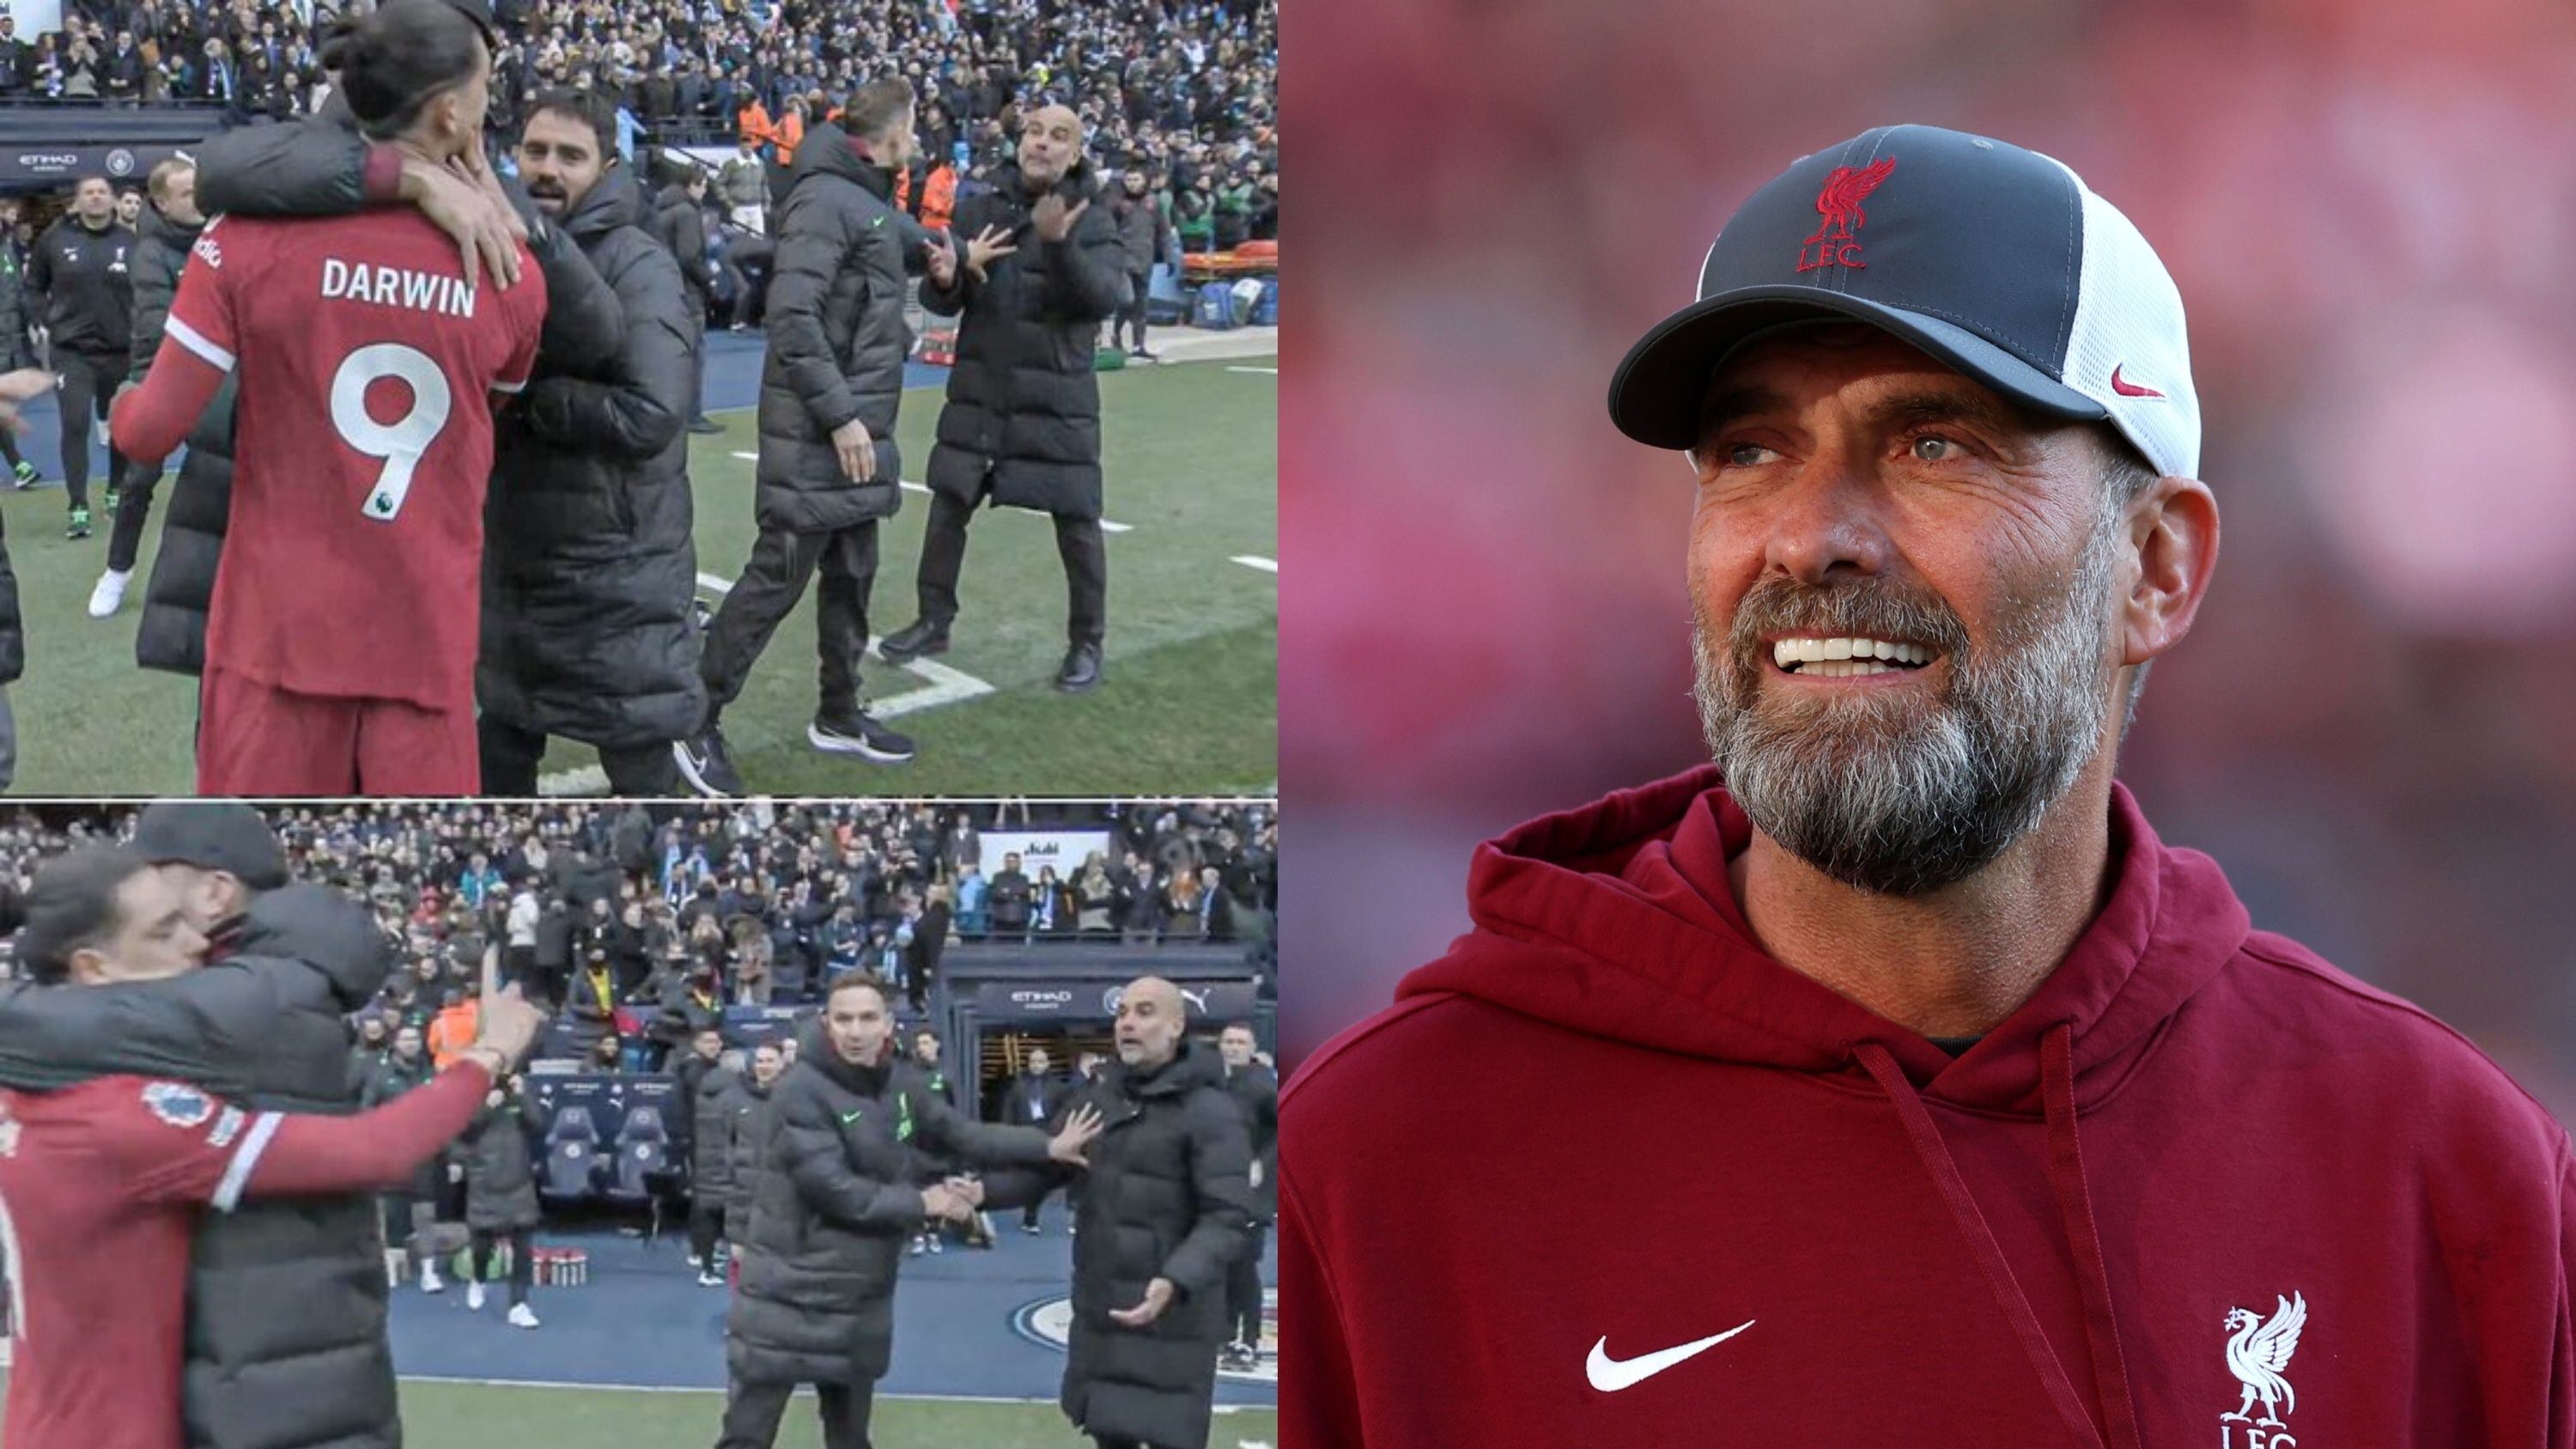 After the fight between Darwin Nunez and Pep Guardiola, Klopp's reaction to the incident